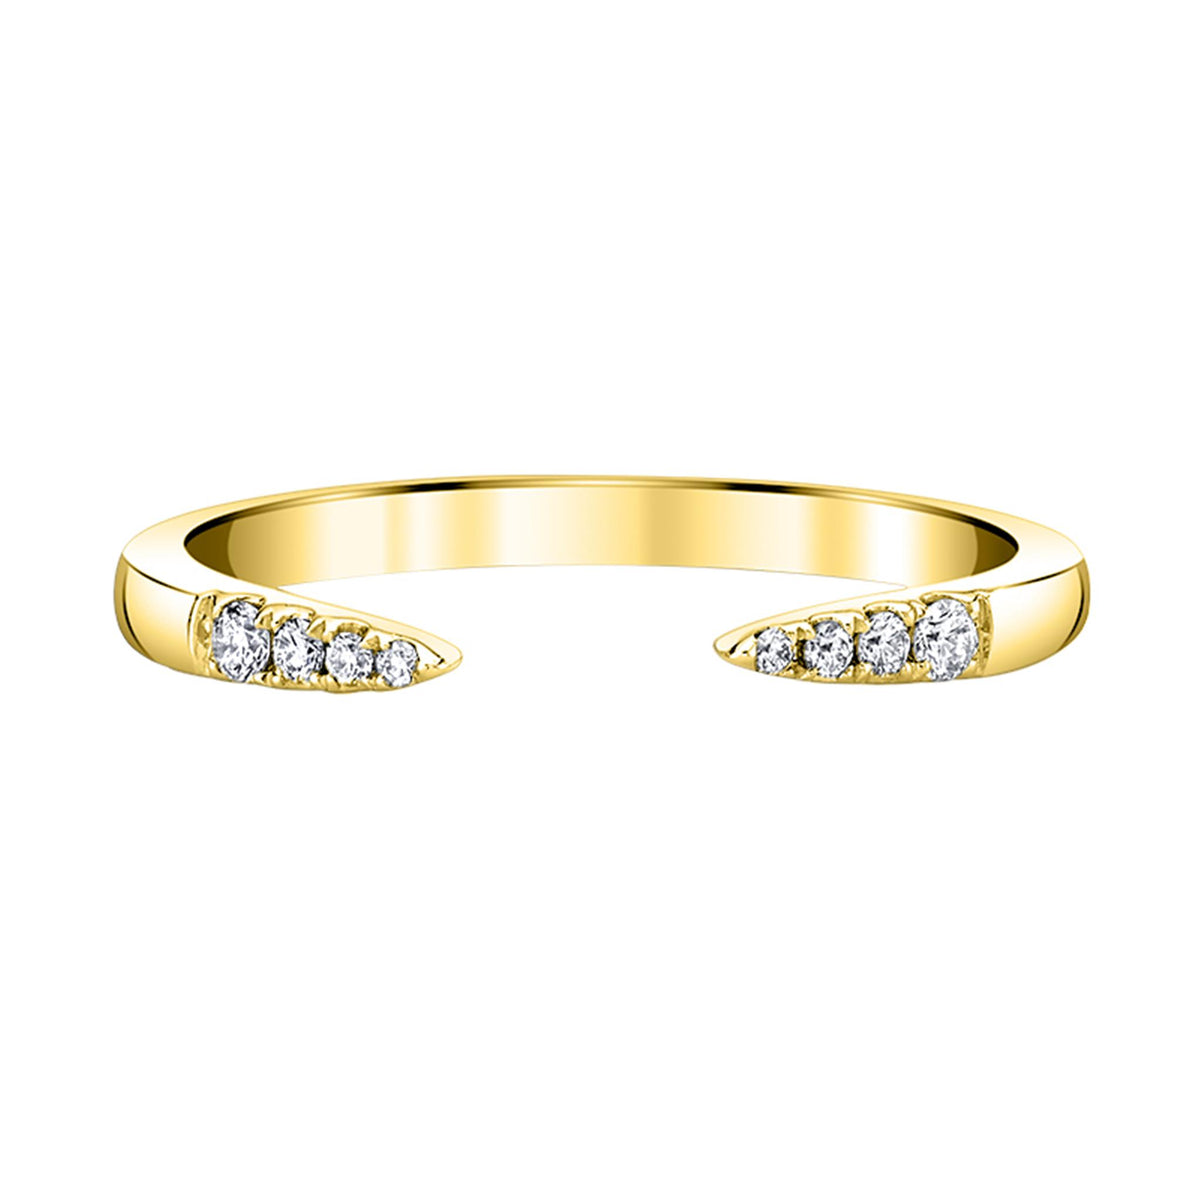 14Kt Yellow Gold Prong Set Wedding Ring With 0.07cttw Natural Diamonds